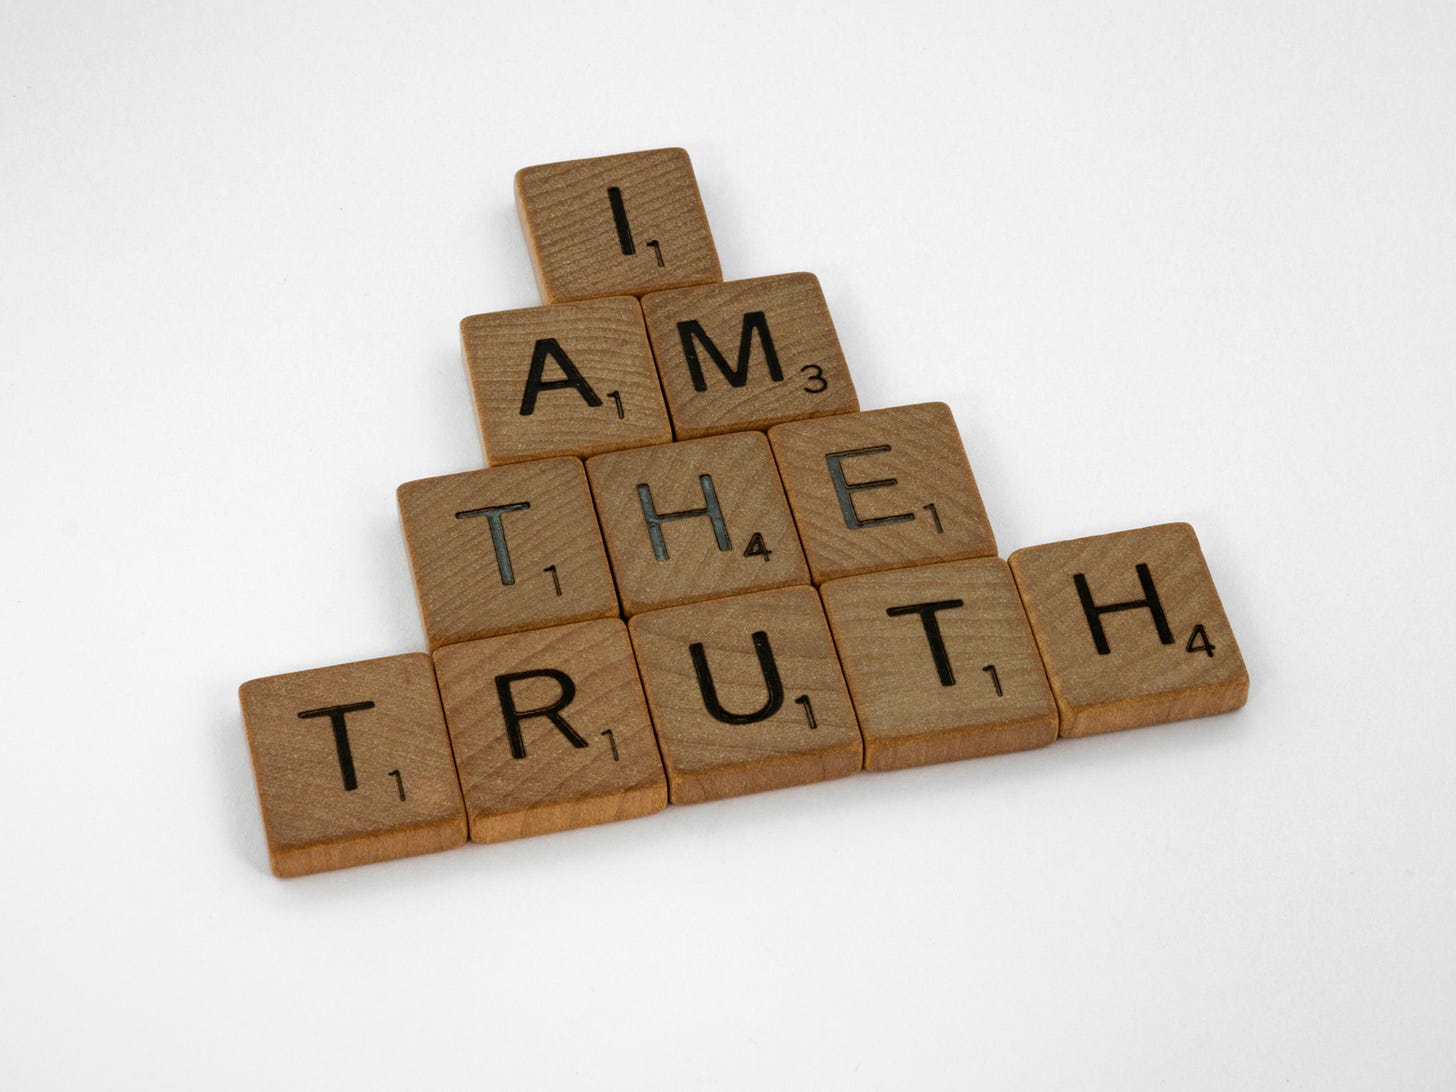 You can only live your truth, even if you’re hiding or not disclosing certain parts. Wooden letter tiles spell out the phrase “I am the truth”. [Credit: Brett Jordon on Unsplash]